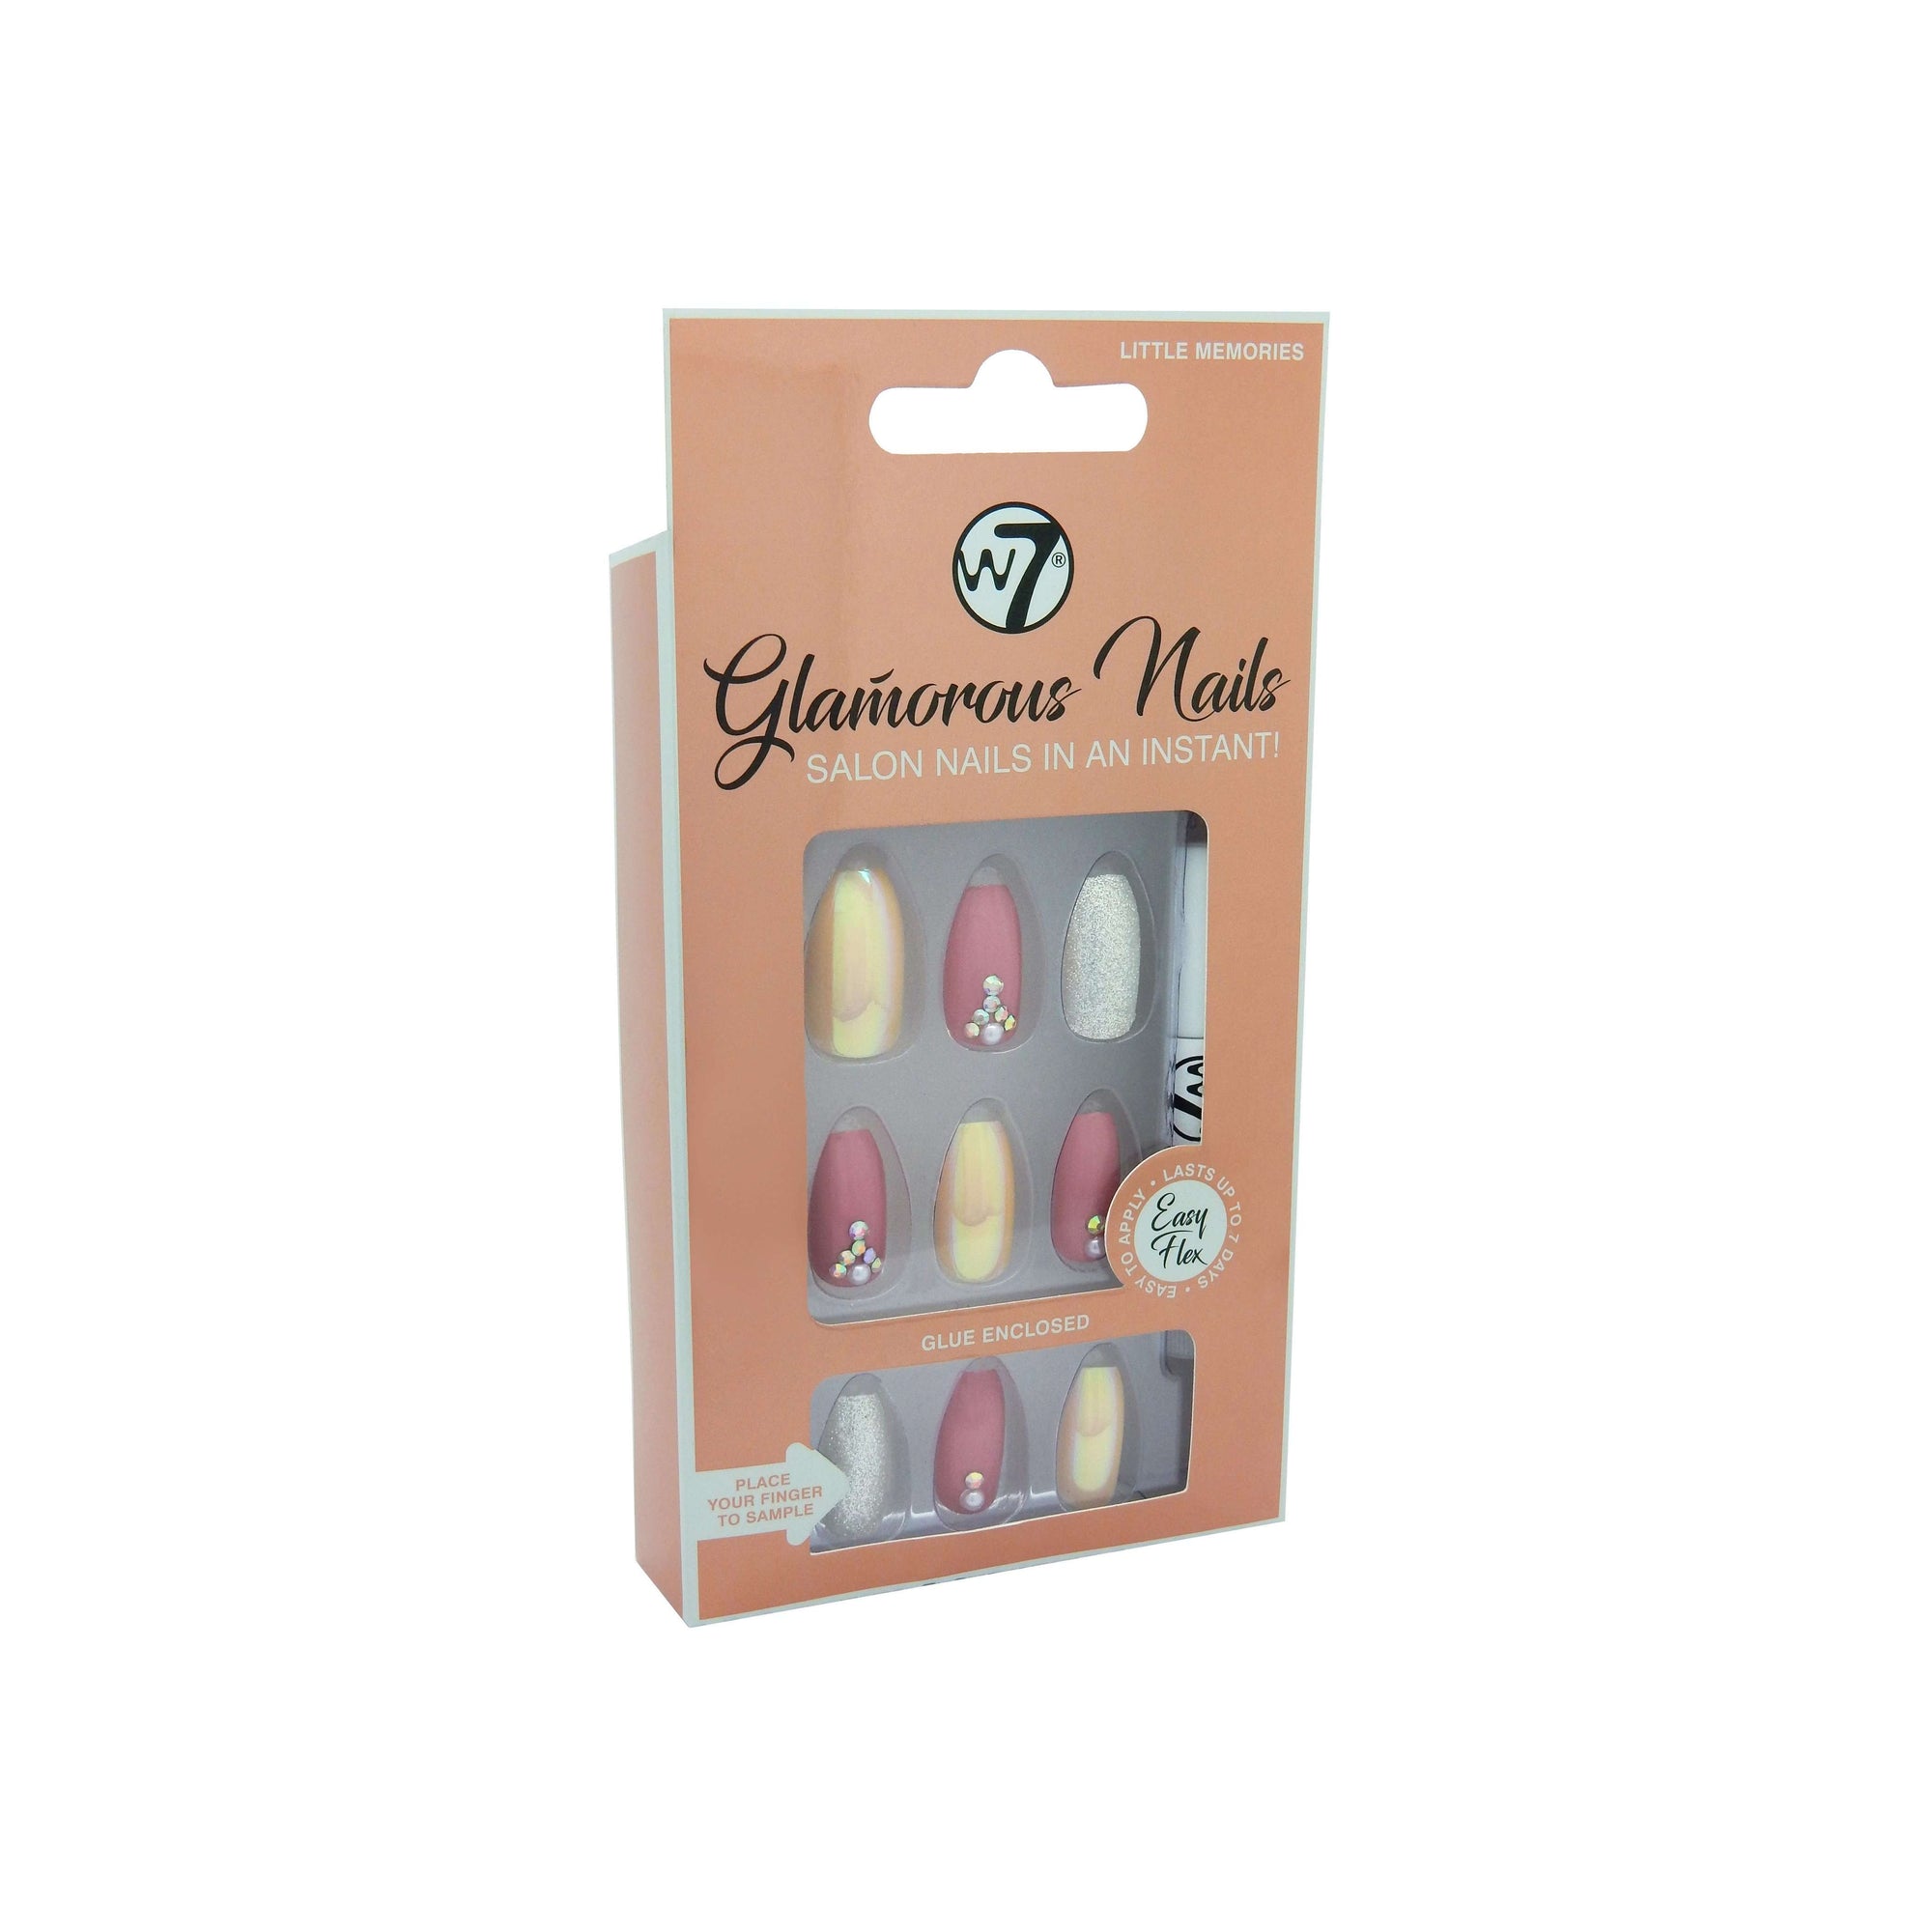 W7 Glamourous Nails Little Memories